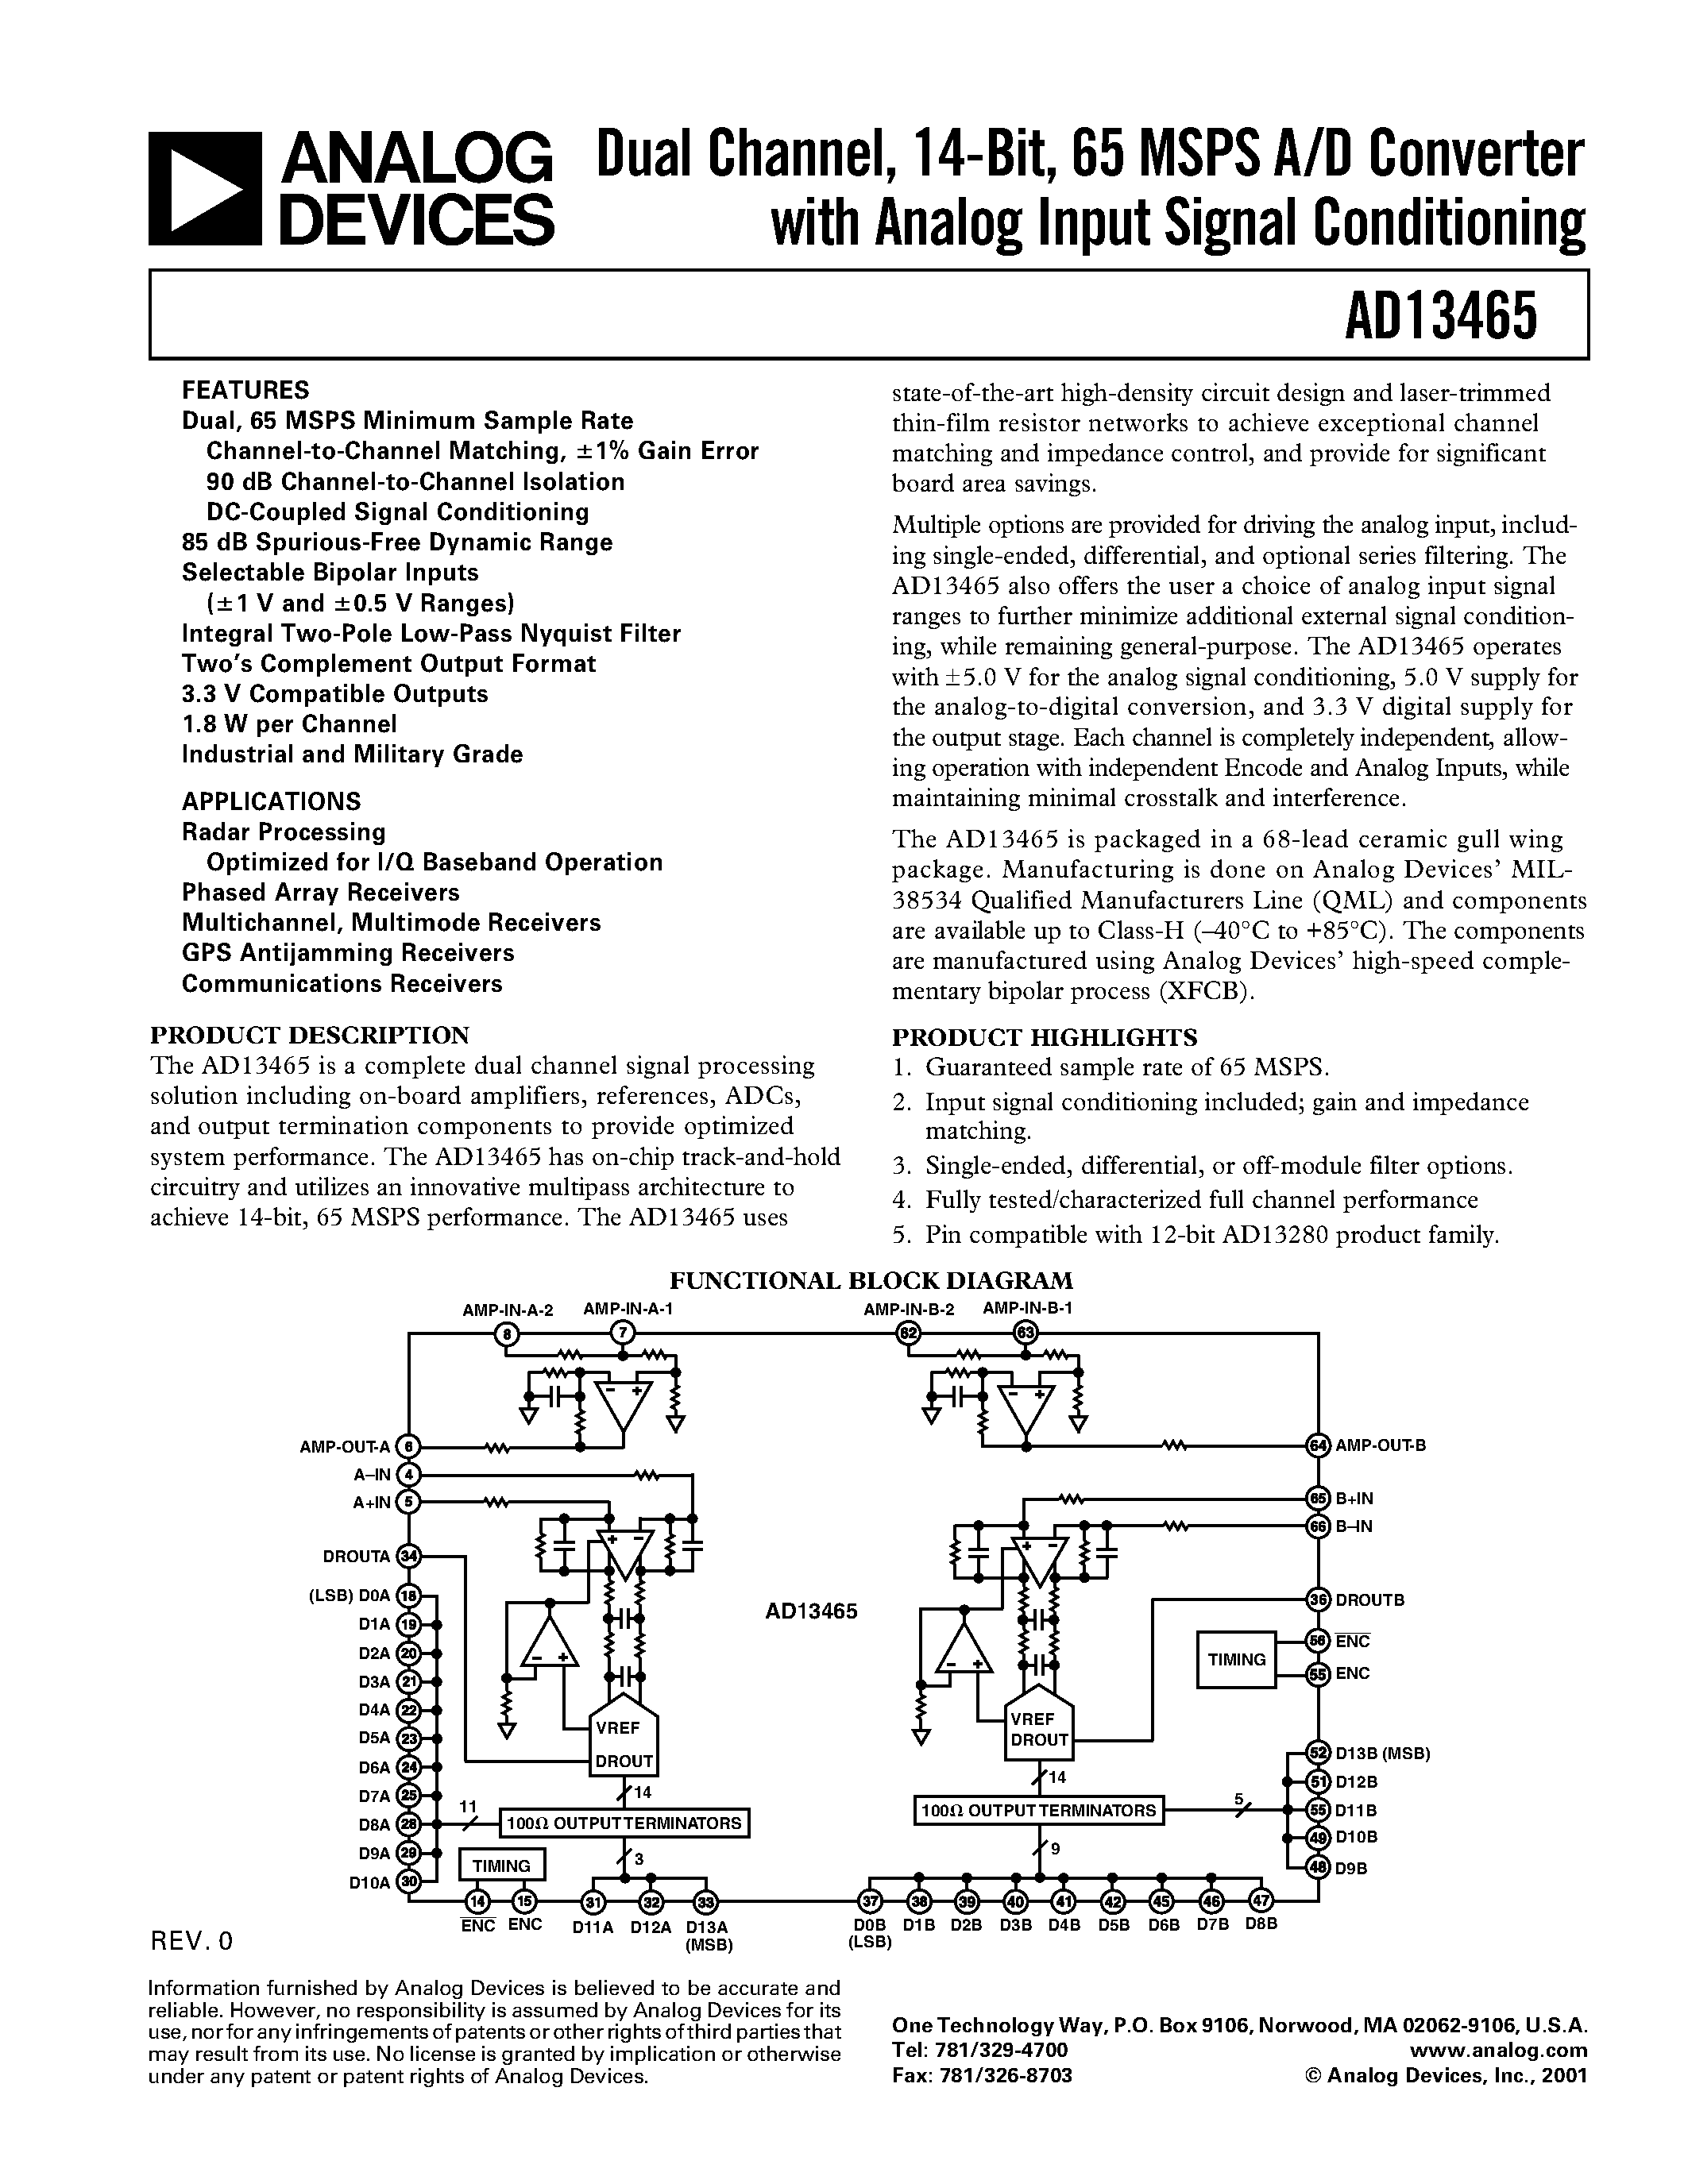 Datasheet AD13465 - Dual Channel/ 14-Bit/ 65 MSPS A/D Converter with Analog Input Signal Conditioning page 1